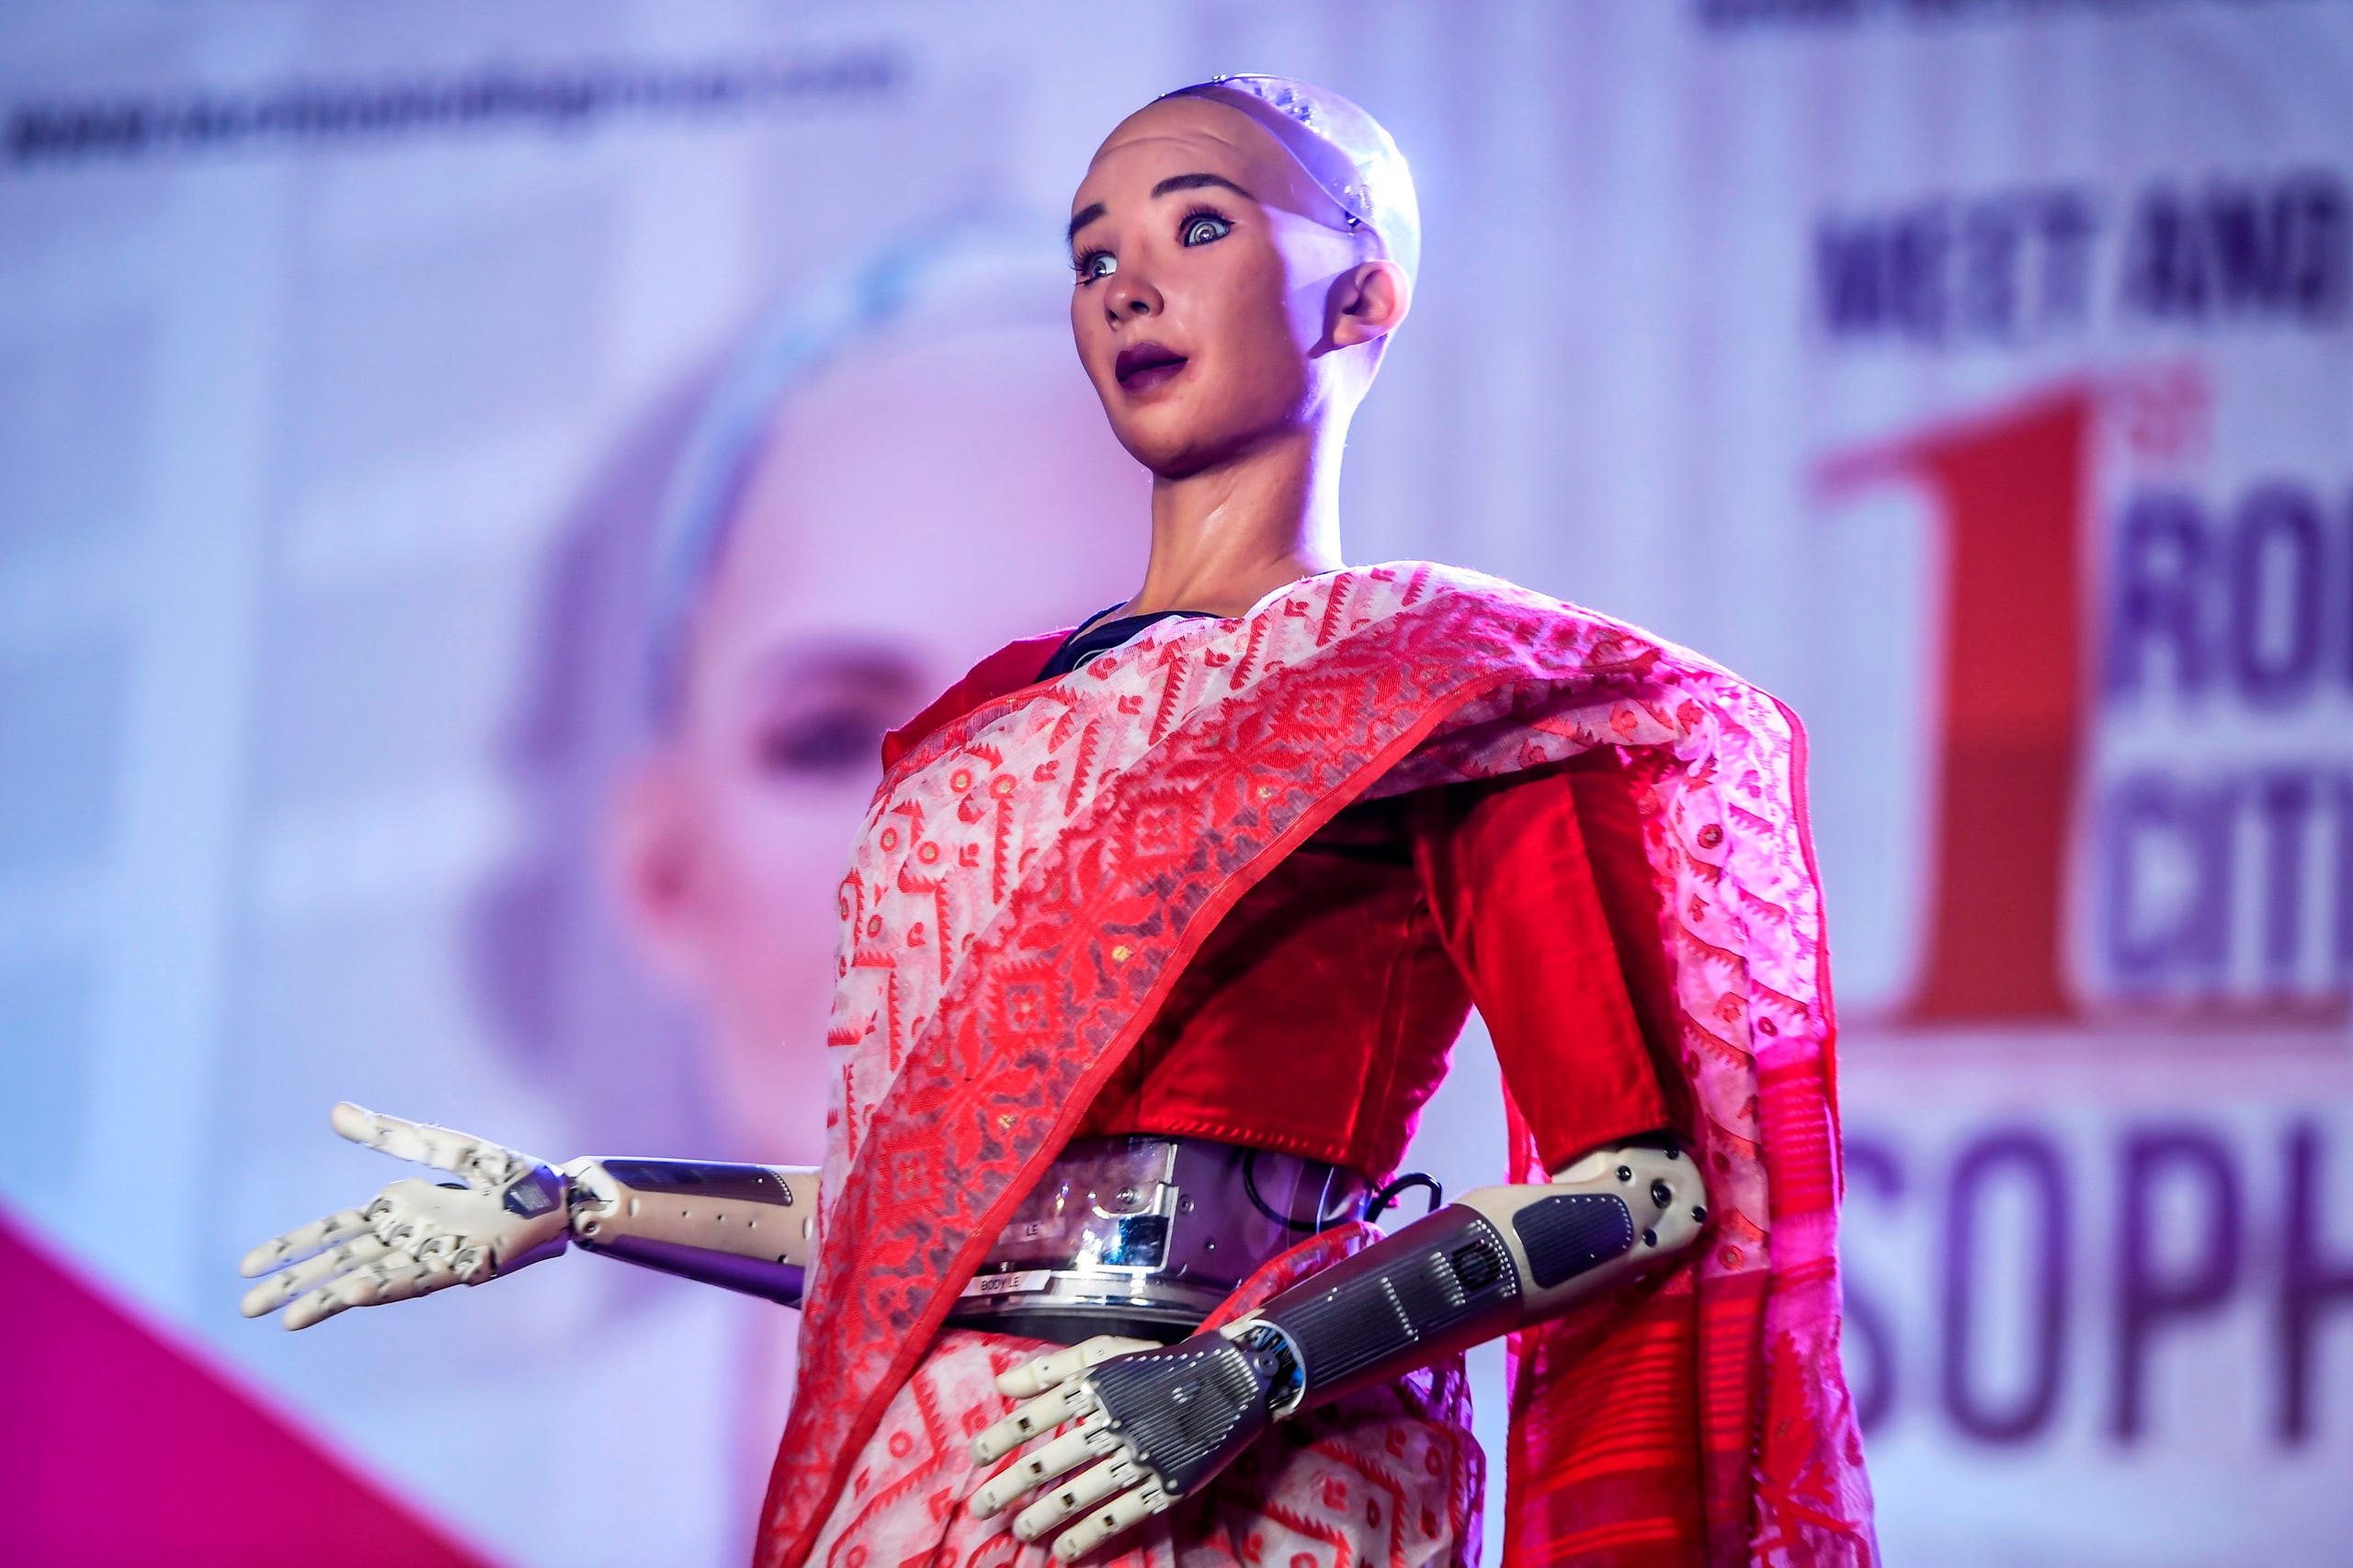 The humanoid robot Sophia, developed by Hong Kong based company Hanson Robotics, appears on stage in front of students and other professionals during a session on artificial intelligence in Kolkata, India on Feb. 18, 2020.